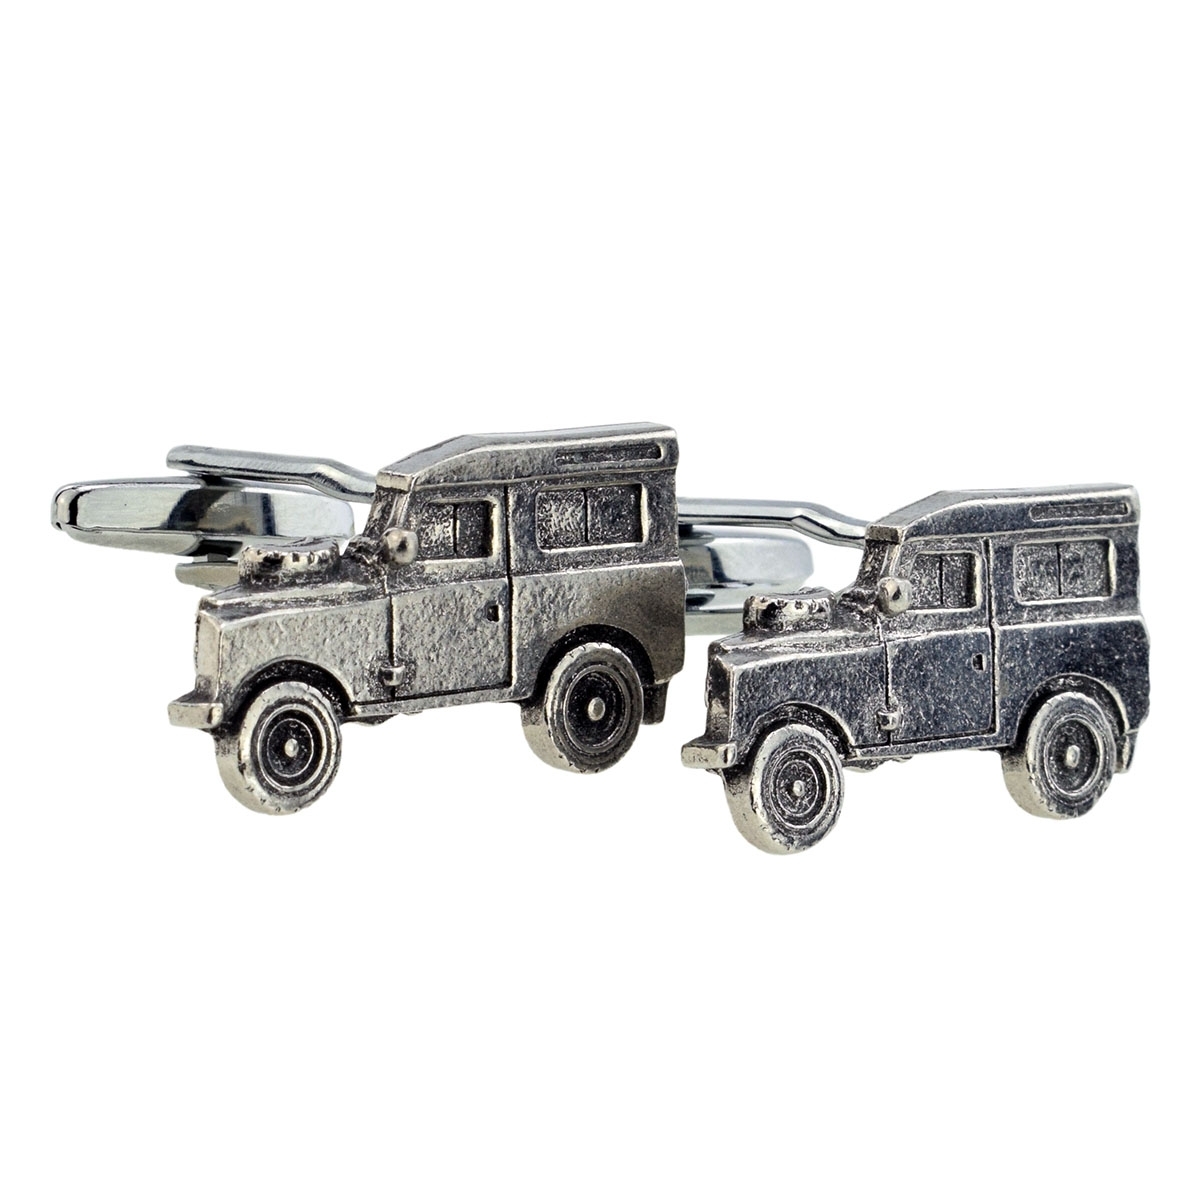 Country All Terrain 4x4 Vehicle Design English Pewter Cufflinks gift boxed